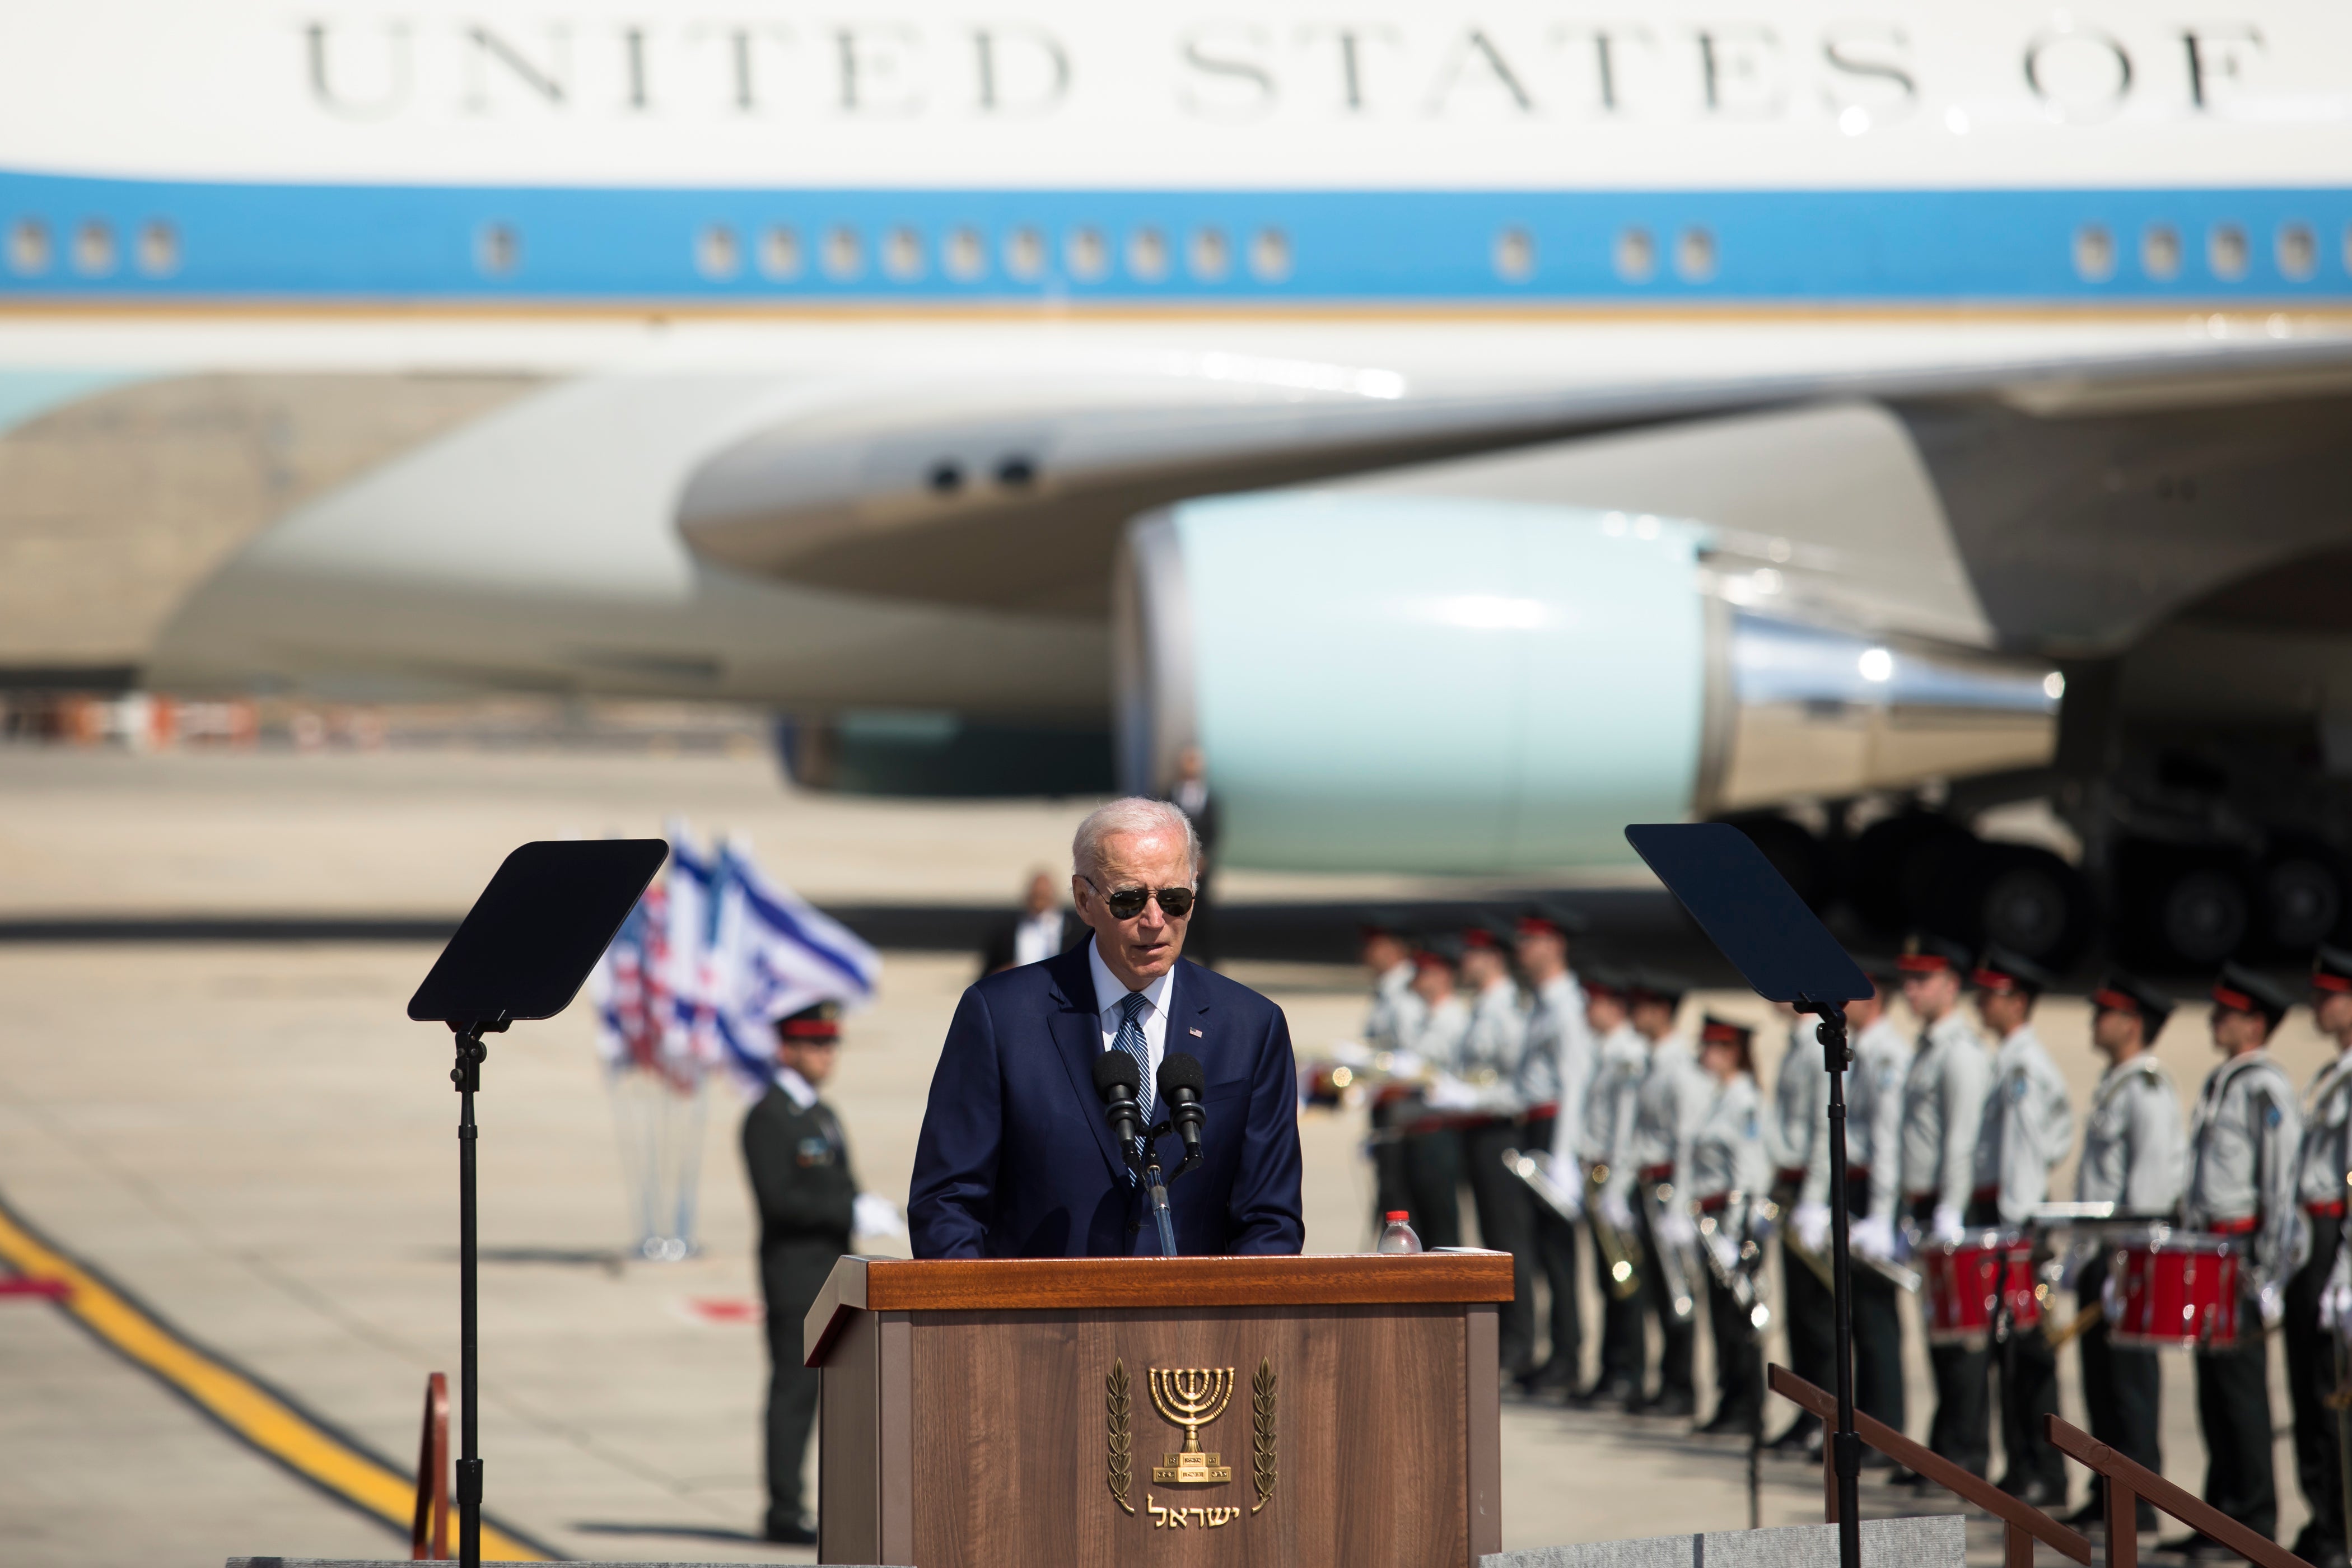 Joe Biden during the welcome ceremony for his visit to Israel